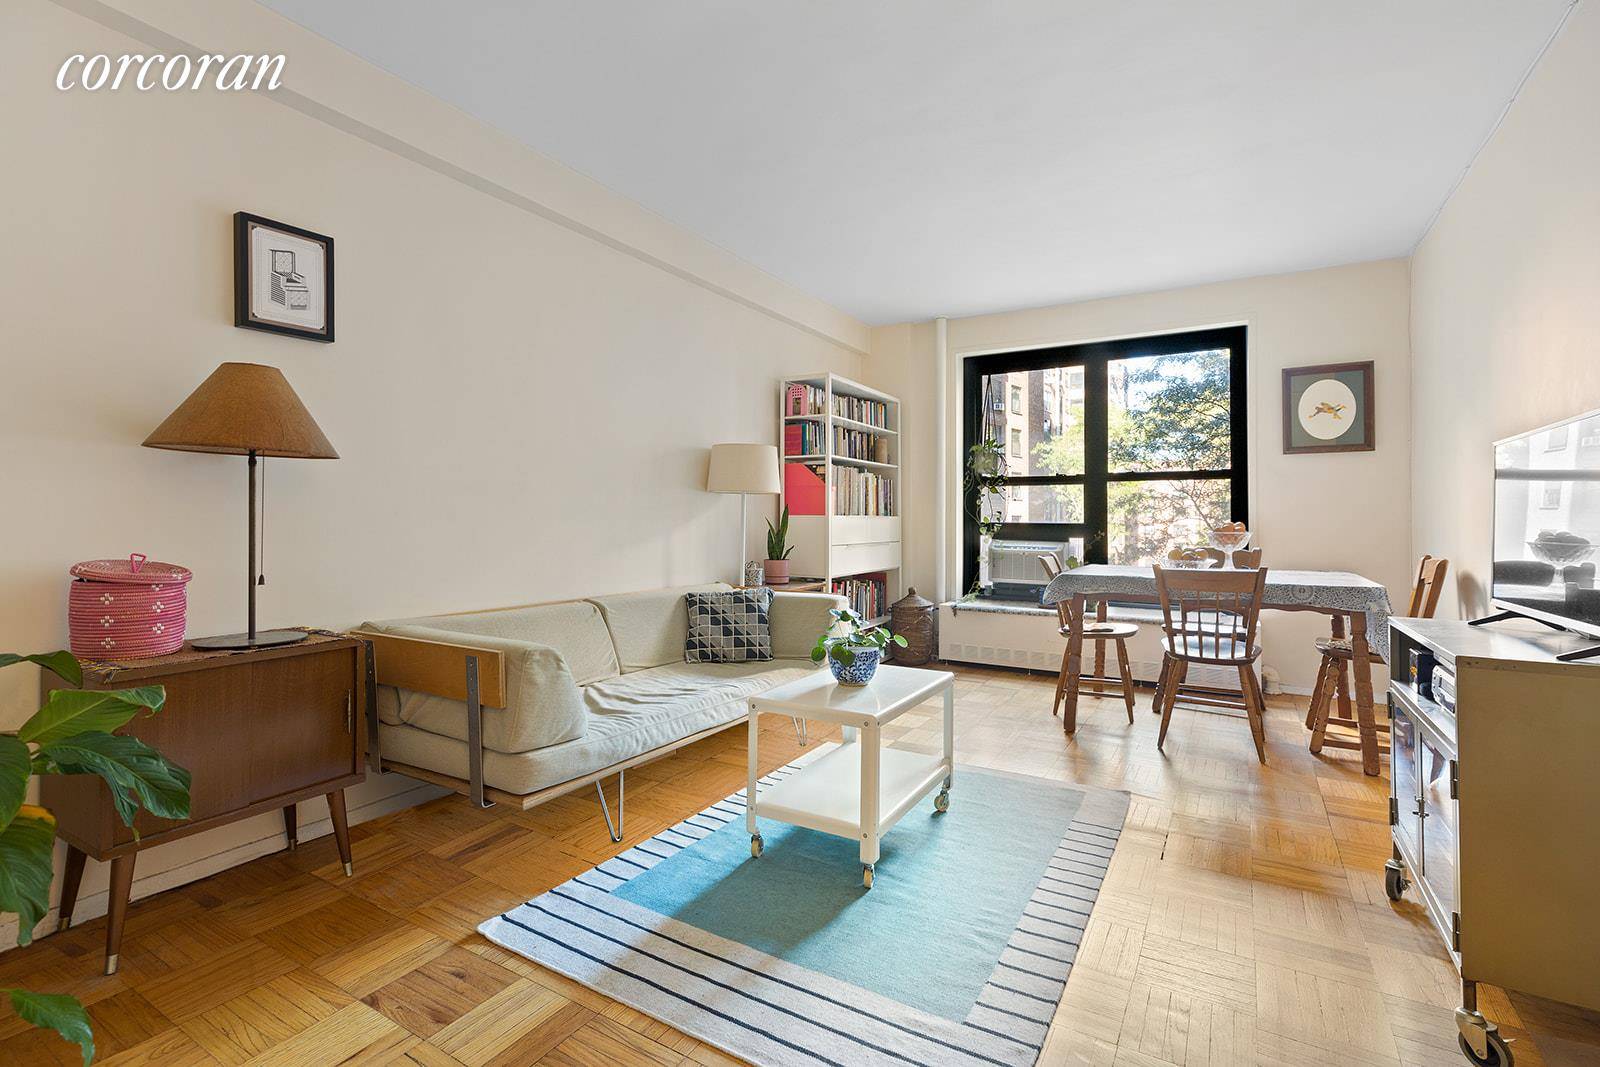 Apartment 4E is a spacious 2 Bedroom home in this highly desirable location on the border of Fort Greene and Clinton Hill, Brooklyn.